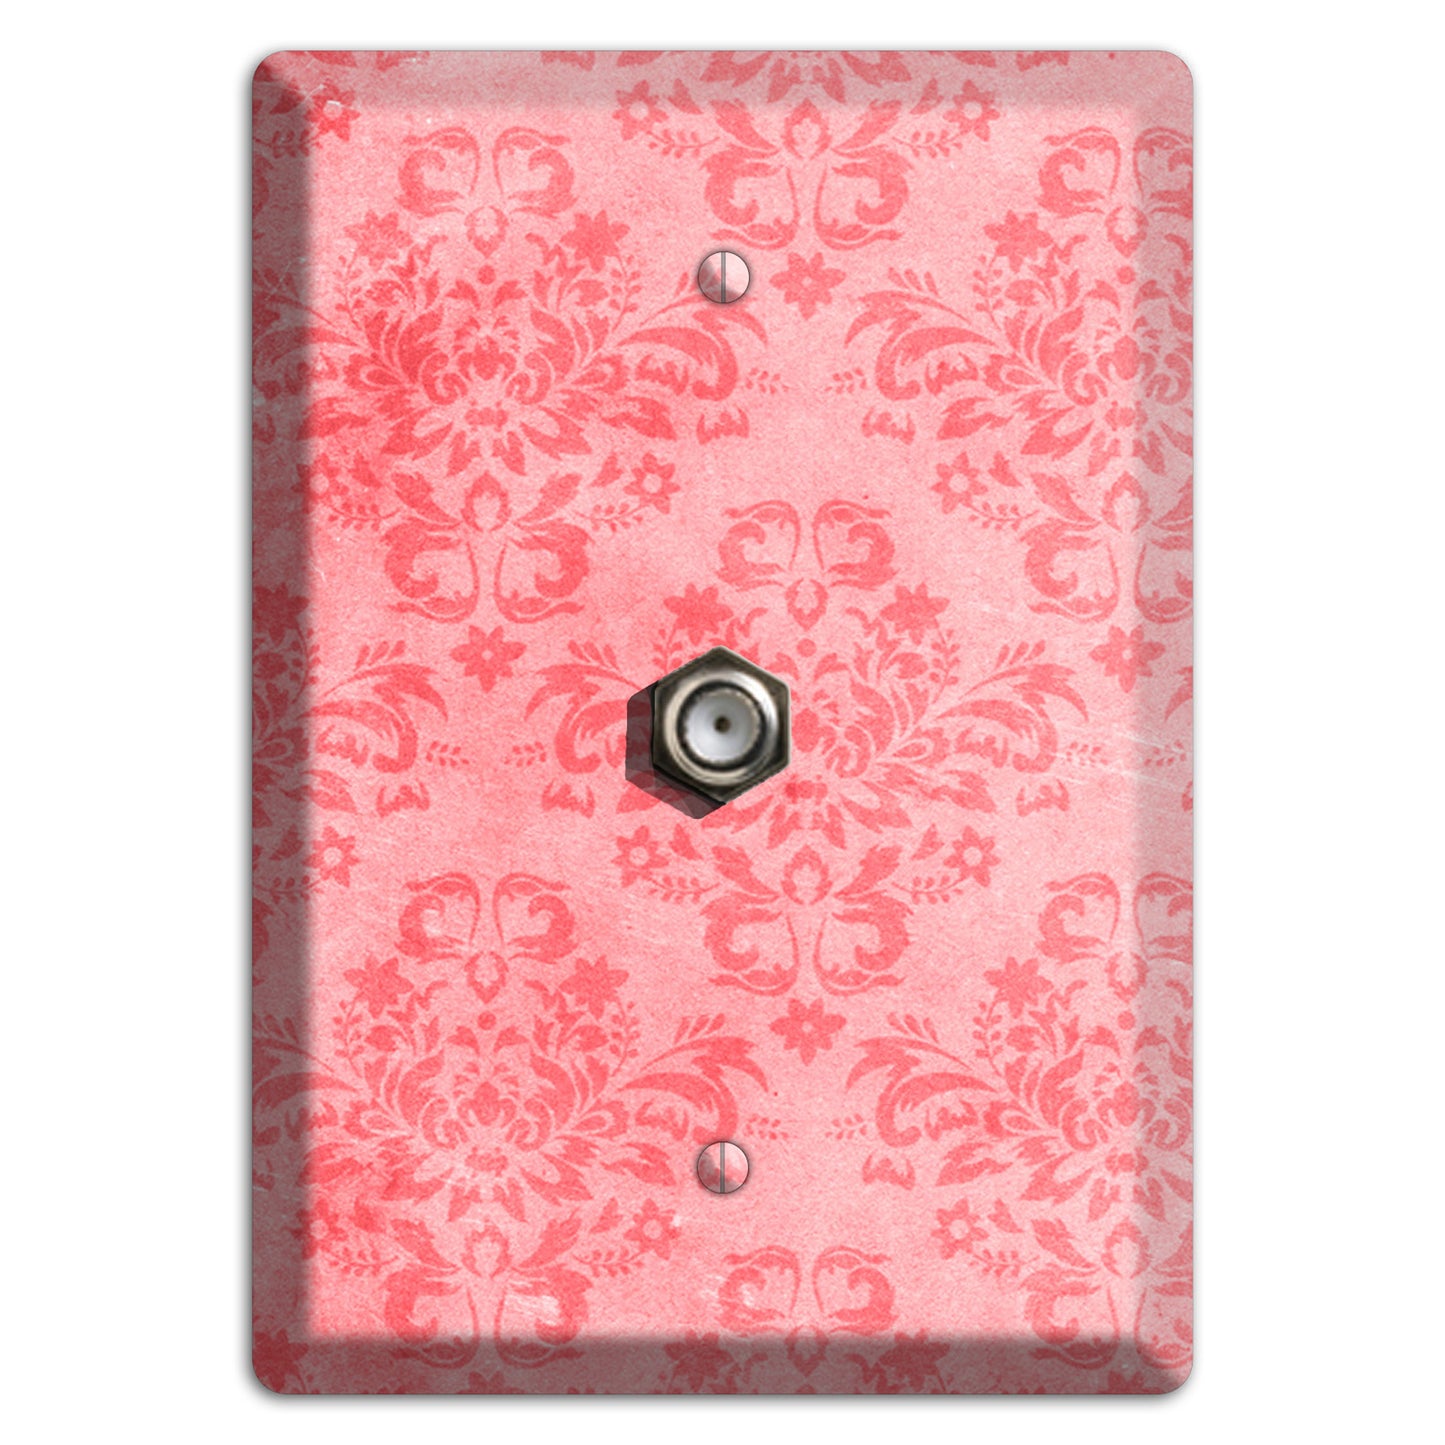 Rose Bud Soft Coral Cable Wallplate